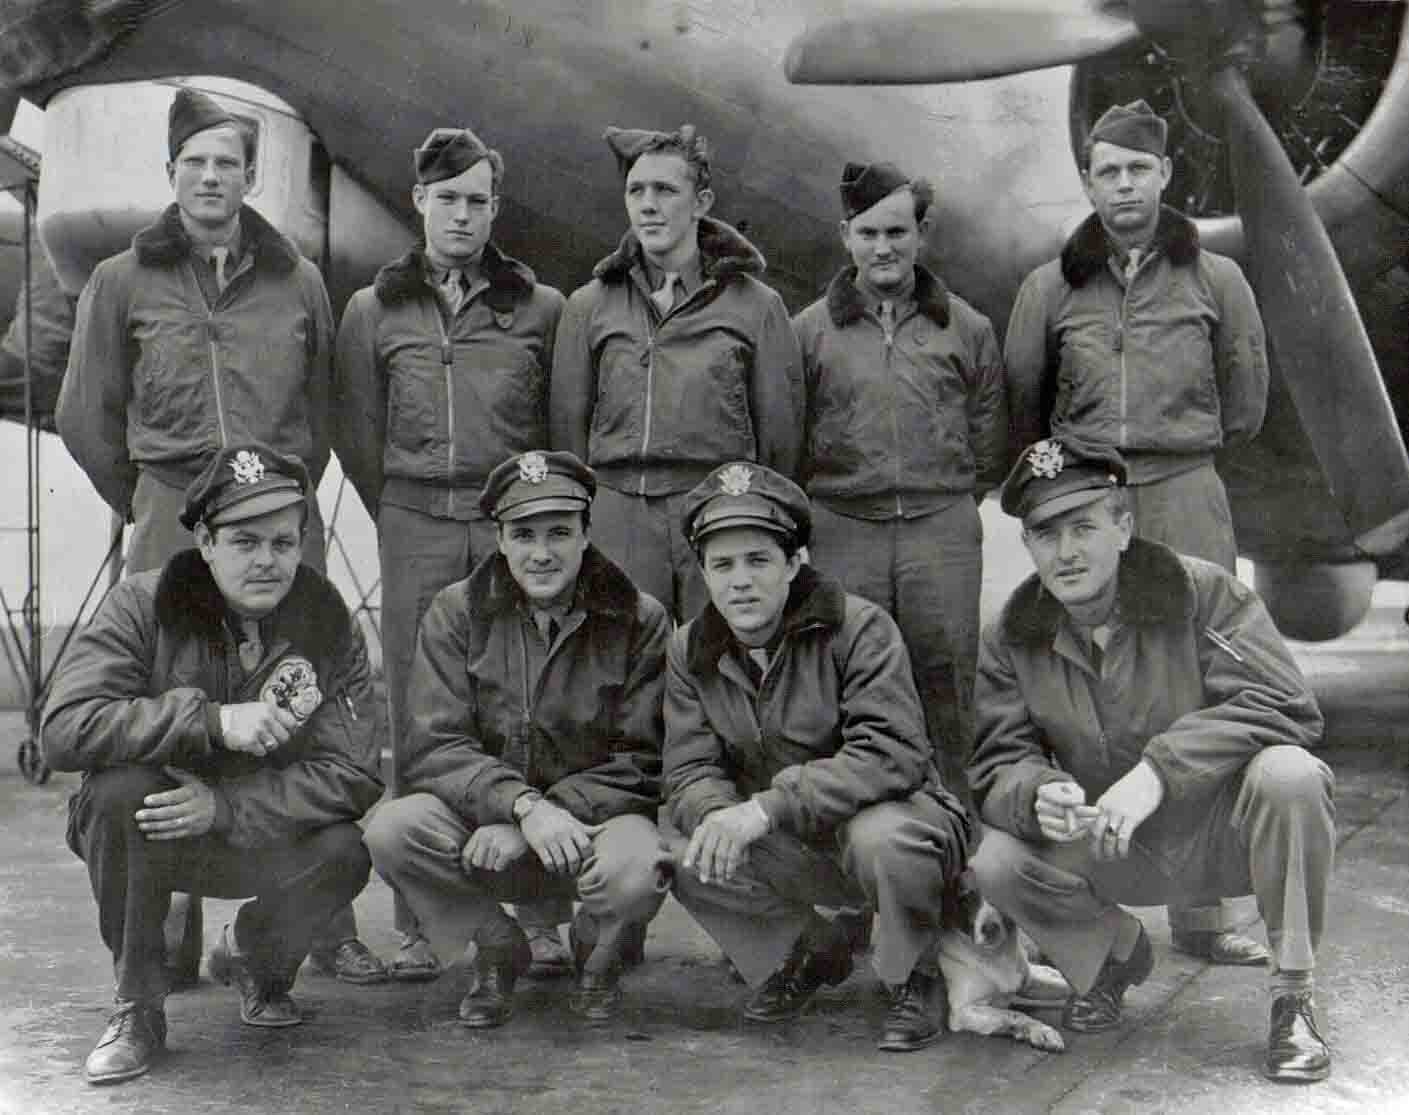 Frederick A. Maurer's Crew - 602nd Squadron - Probably April 1945